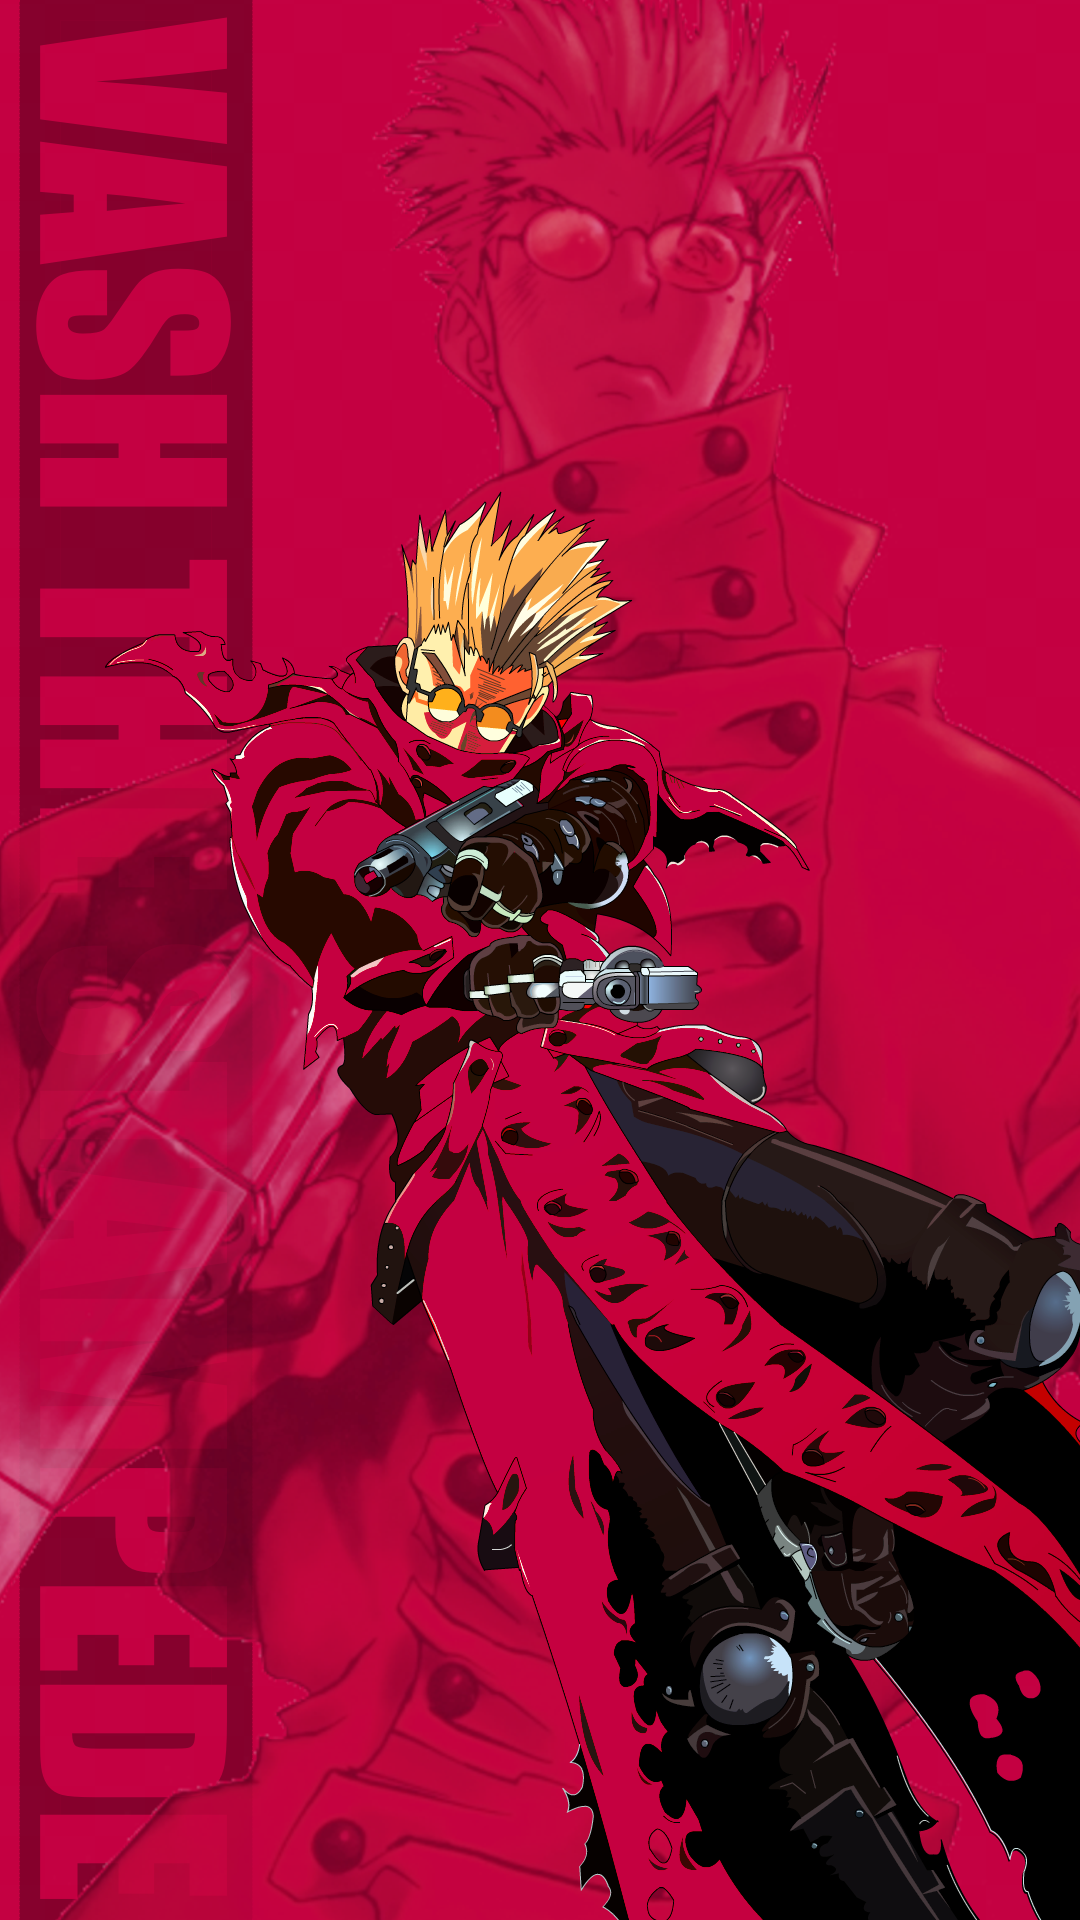 Made a vash the stampede phone background for anyone to use